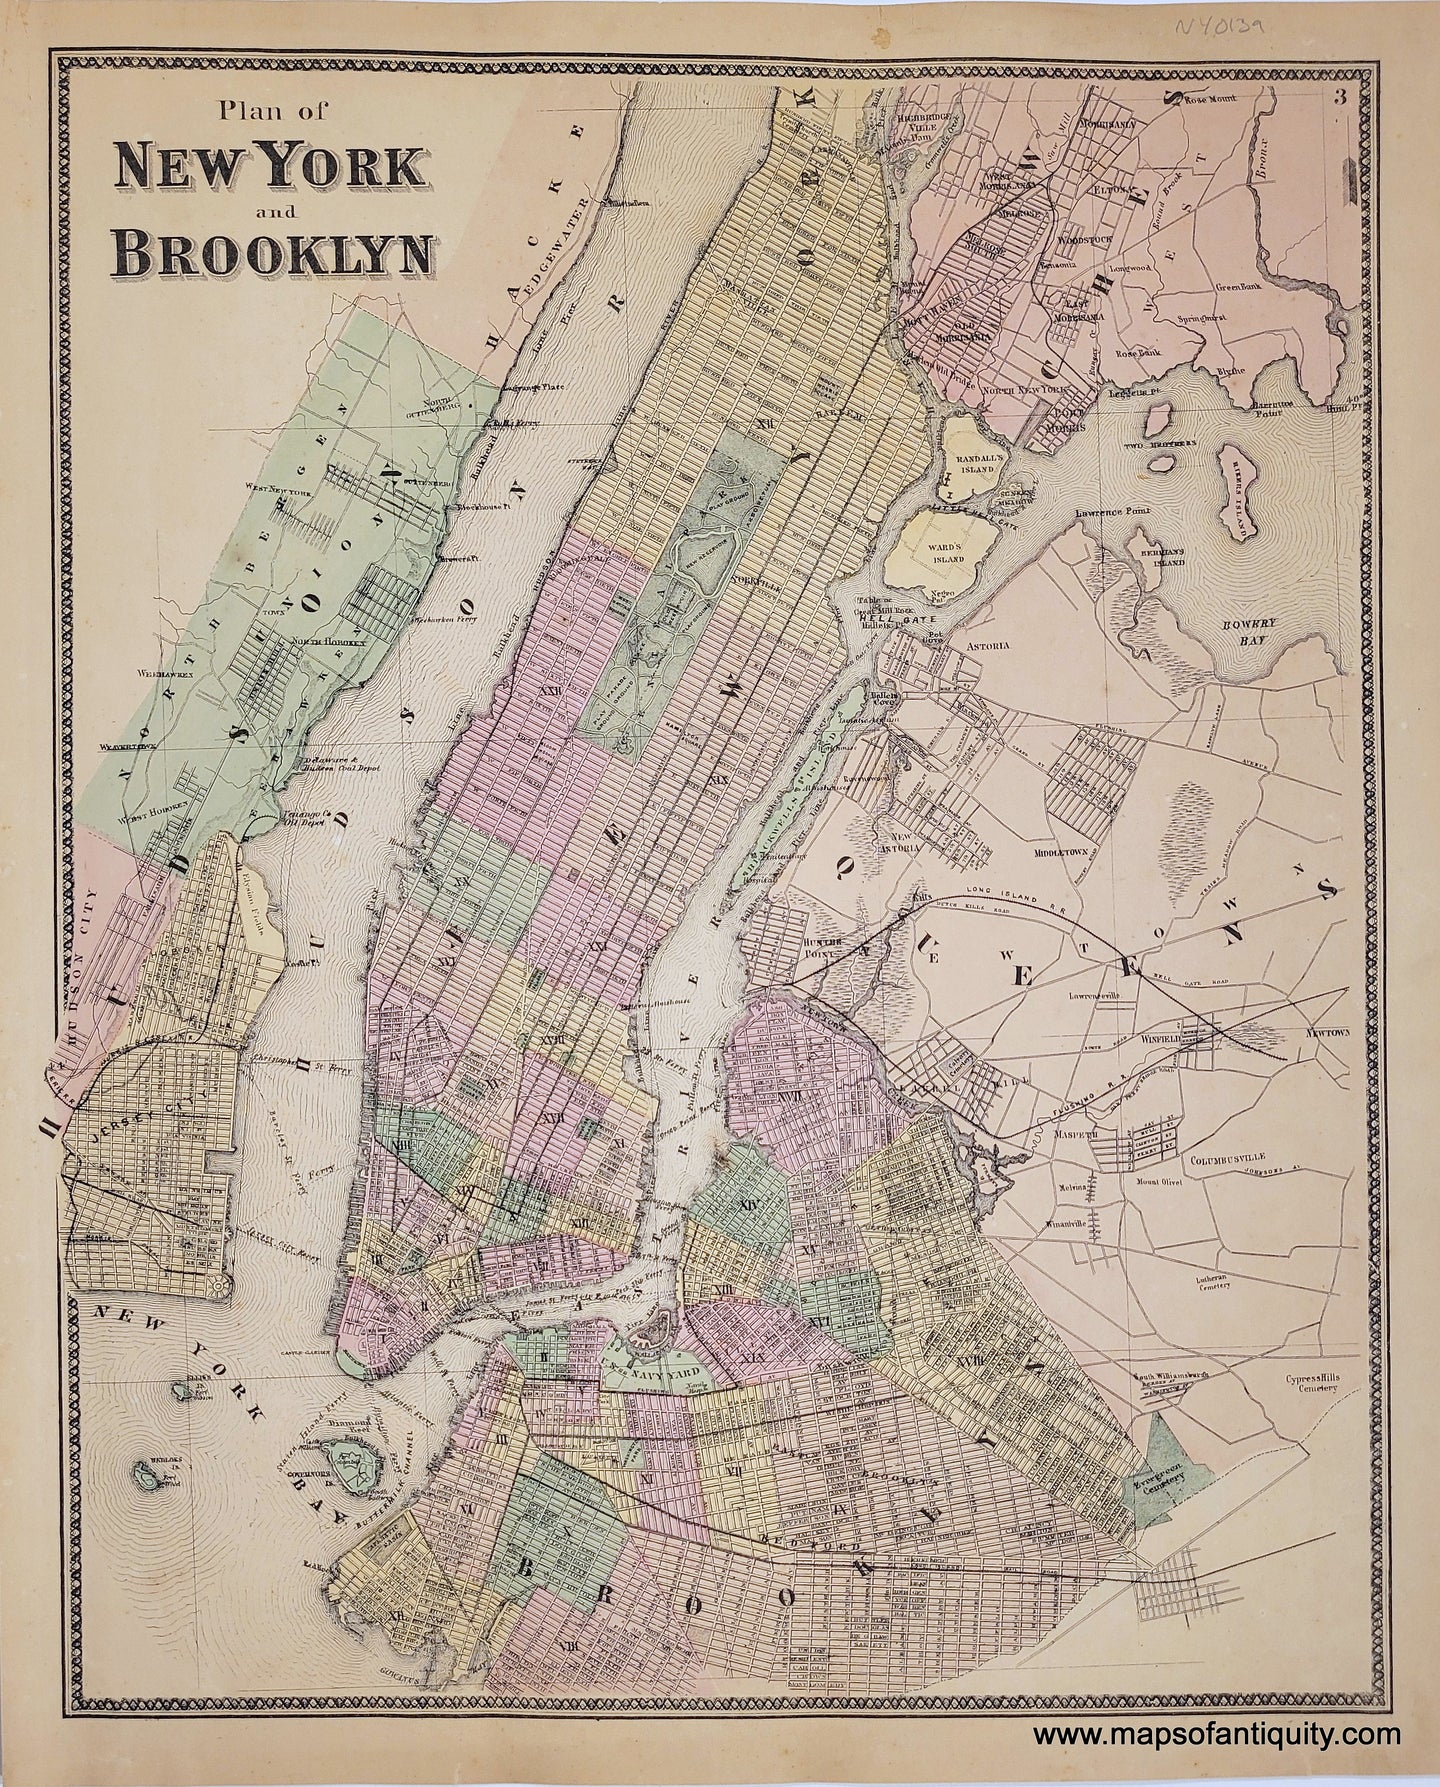 Antique-Map-Plan-of-New-York-and-Brooklyn-City-NYC-Manhattan-1867-Beers-1860s-1800s